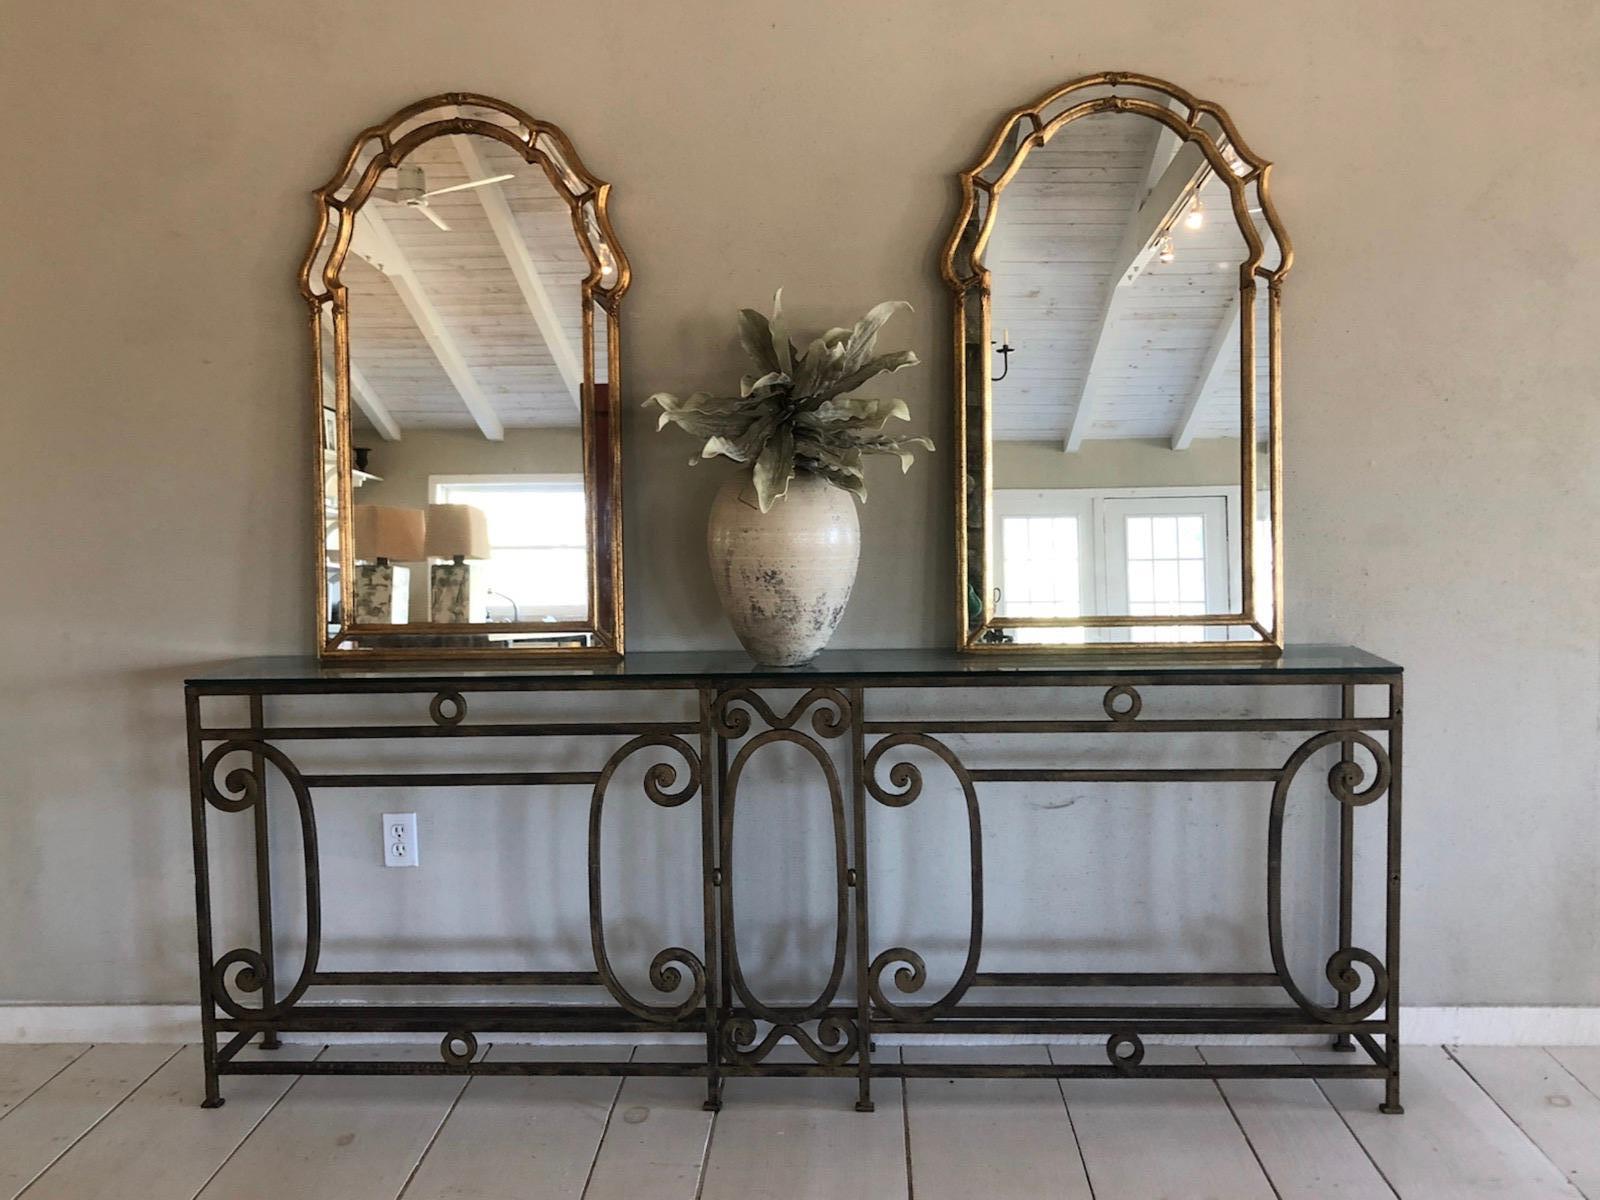 Pair of stylish modern 1970's Italian mirrors with a gilt finish. The mirrors have an arched top and geometric sides, giving this mirror a transitional appeal. The simple elegance of these mirrors lends them to work in classic, period or modern